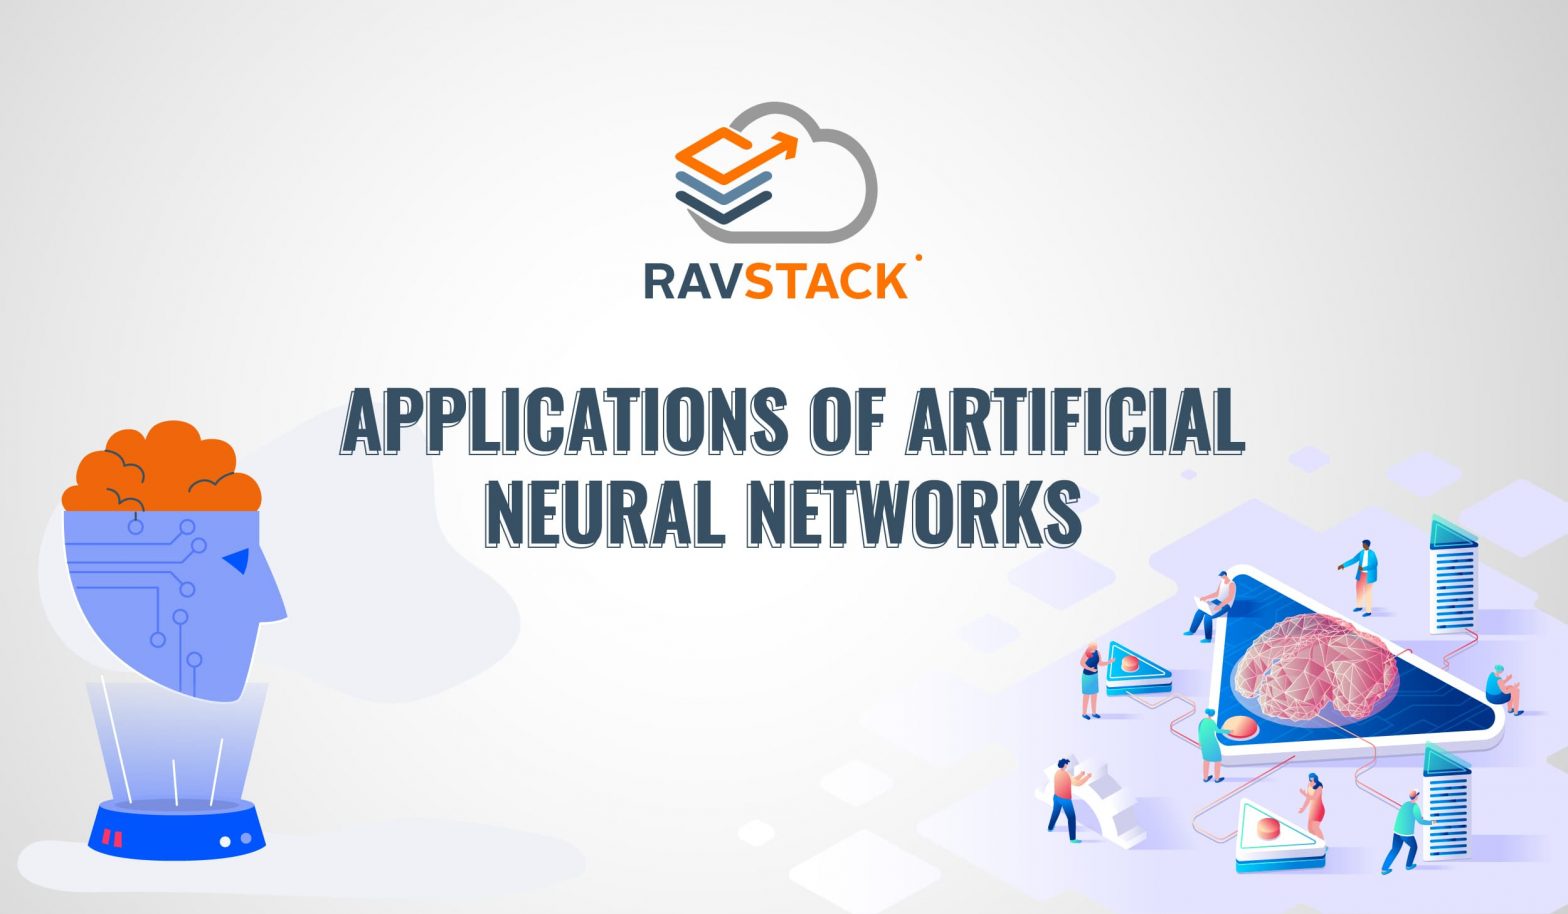 Overview of Artificial Neural Network and its applications